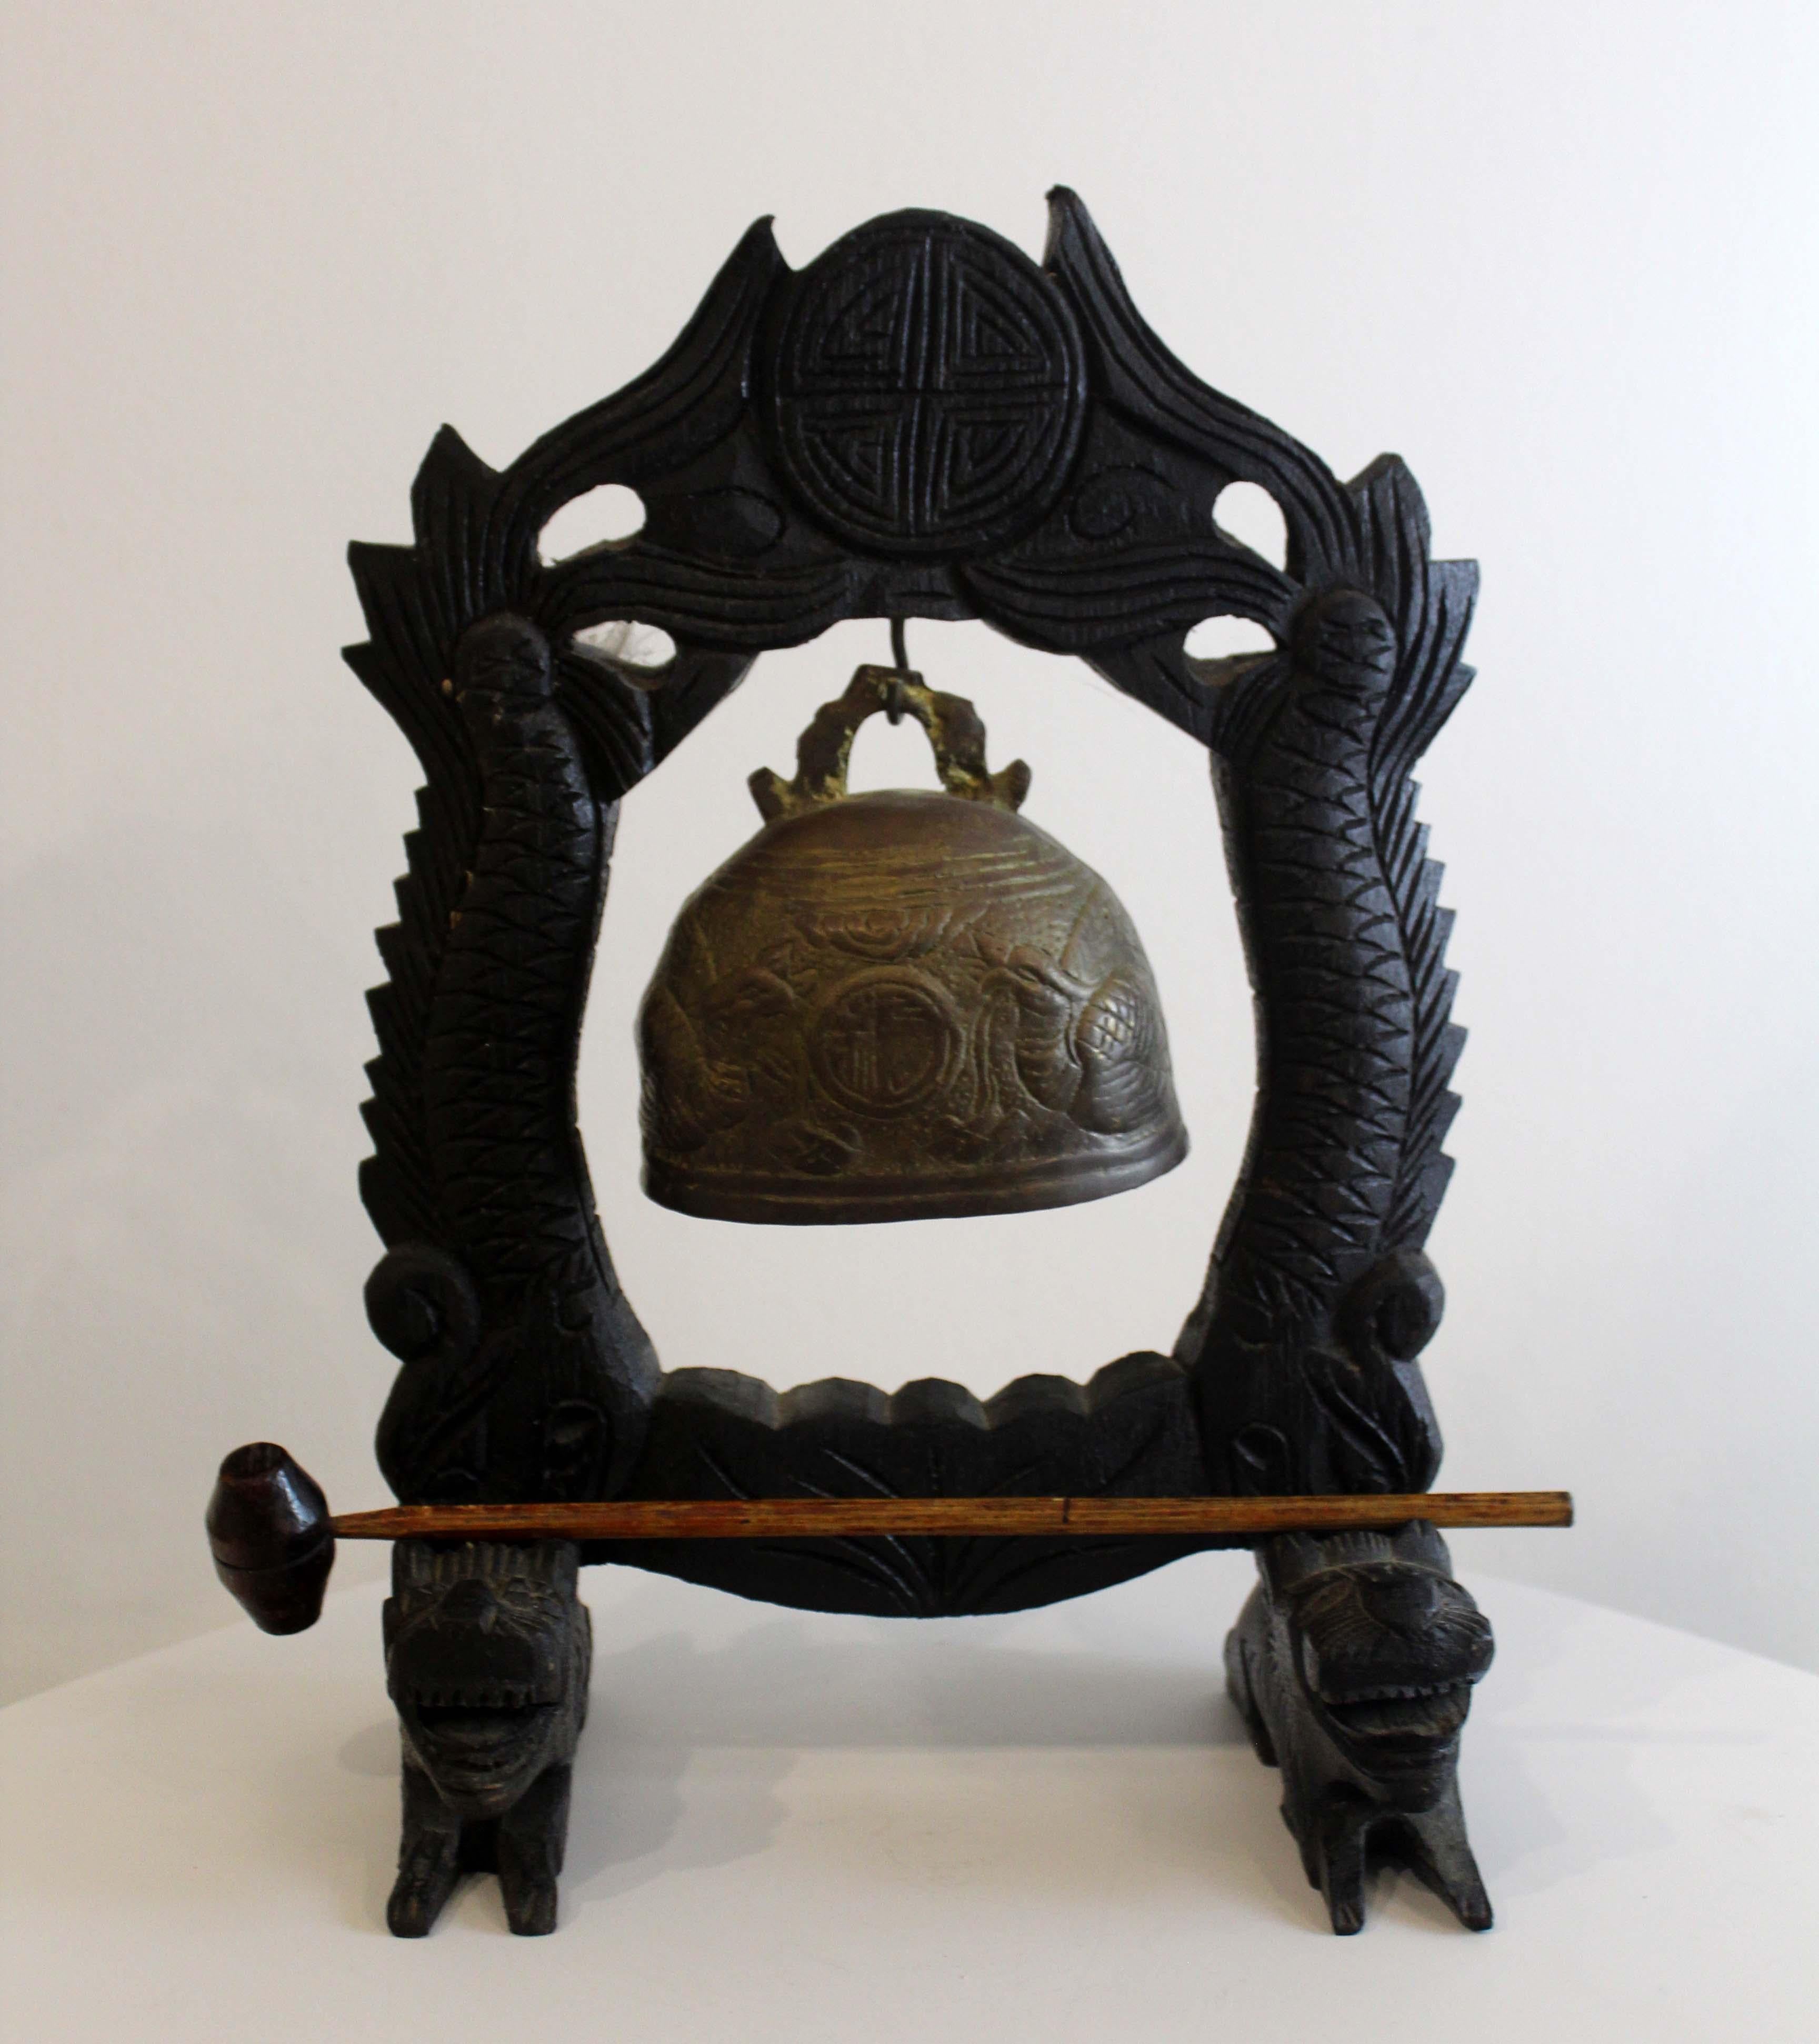 A fascinating vintage Chinese wood and brass gong bell. Carved and engraved details make this a showstopping collector’s time. Includes gong to ring bell. Original item from the 20th century. From a private collection. Dimensions: 12.75 H x 8.5 W x